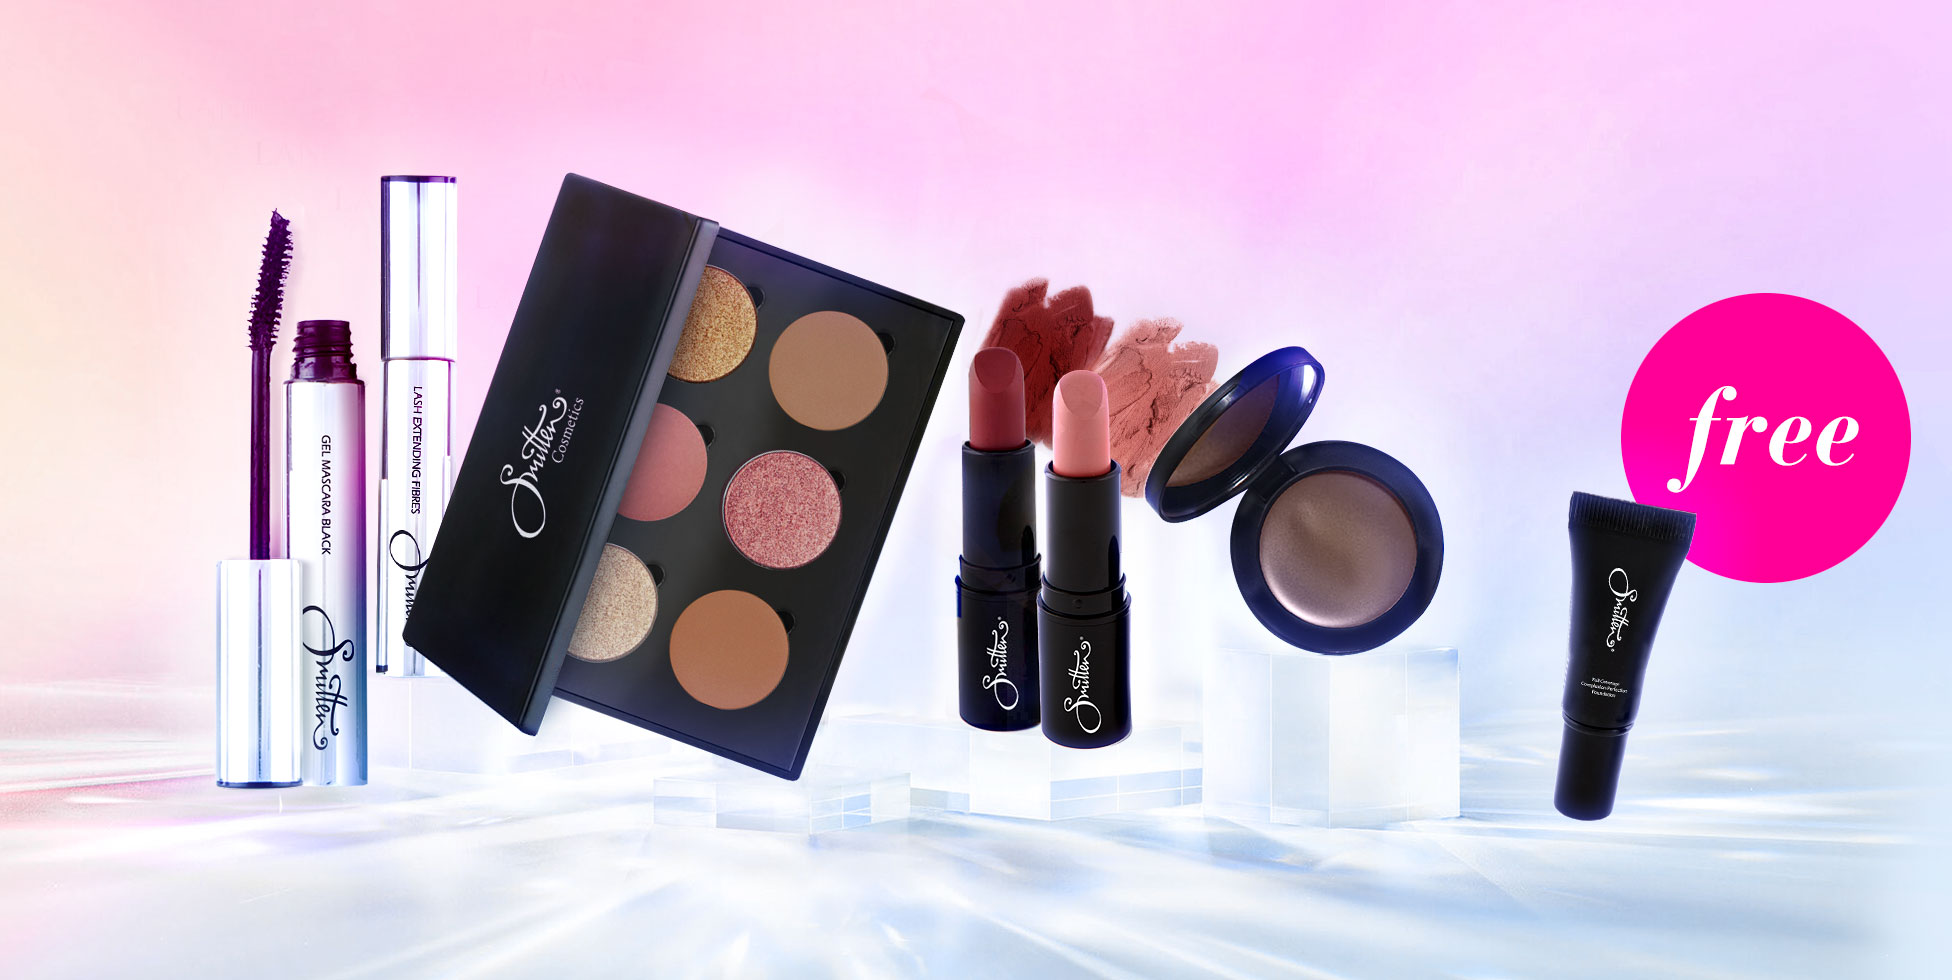 Smitten Cosmetics Value Best Makeup Pack Free Gift Tammy Hembrow